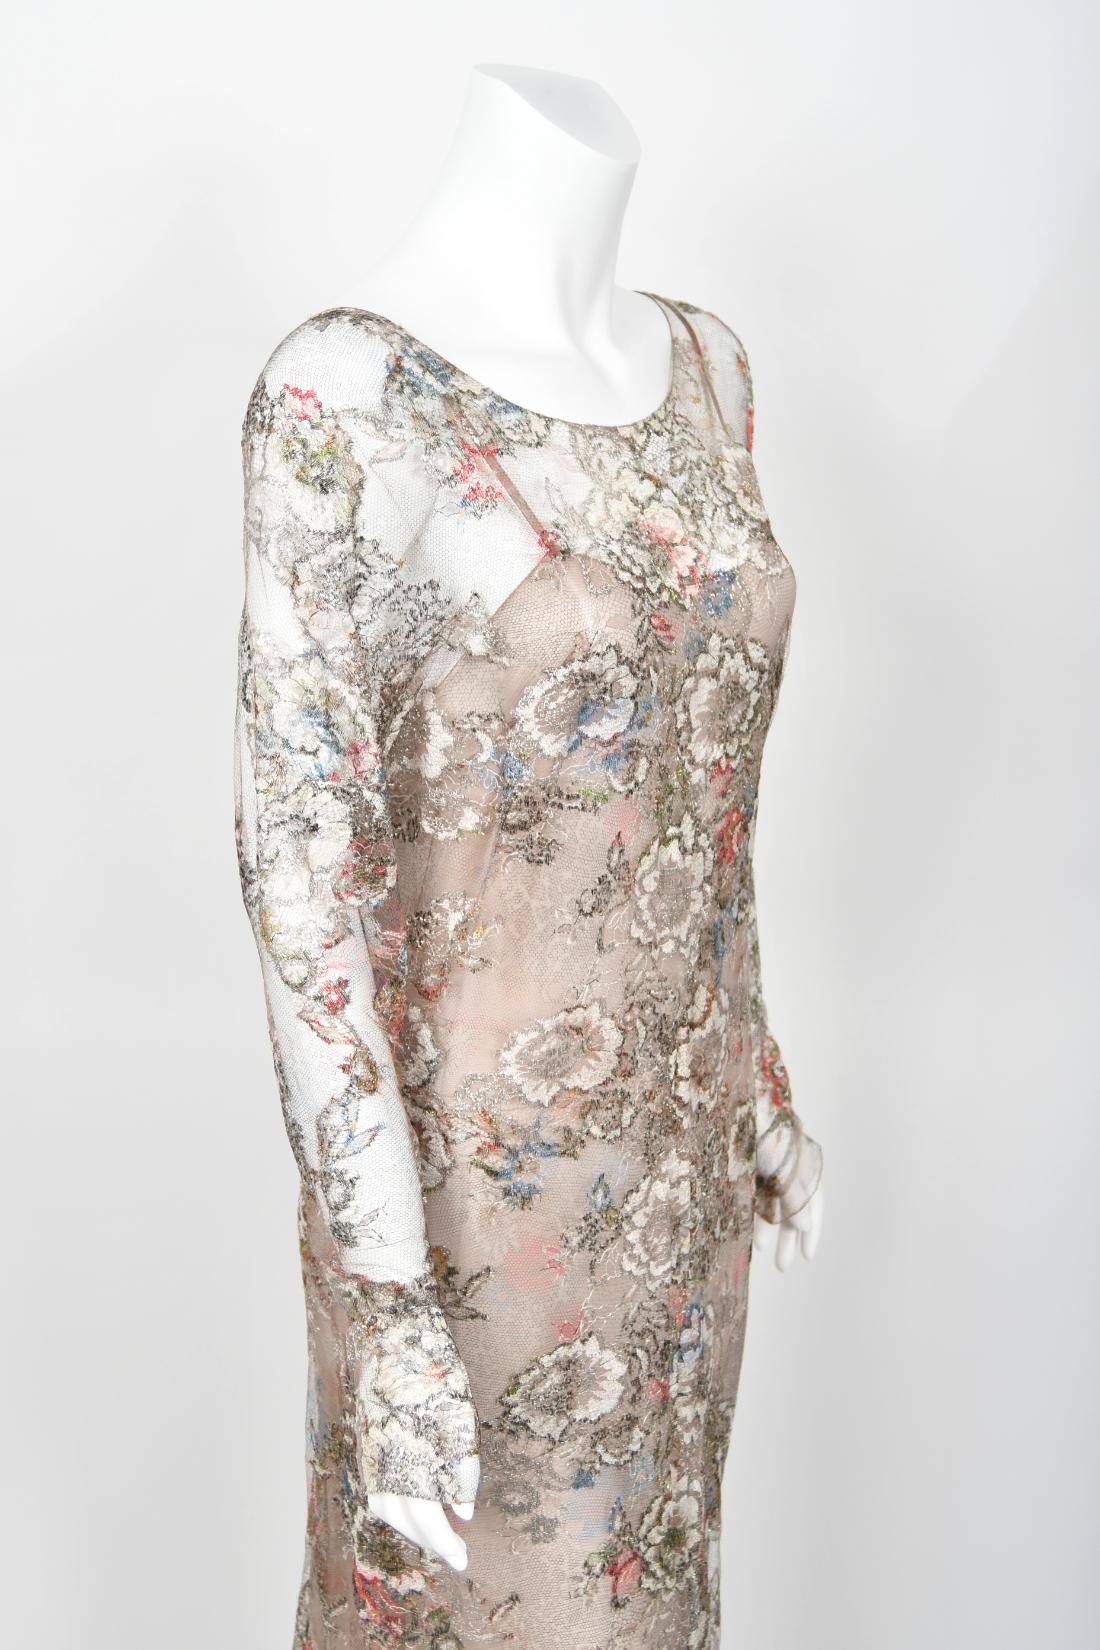 Important 2011 Chanel Runway Vogue Rihanna Editorial Sheer Metallic Lace Gown For Sale 7